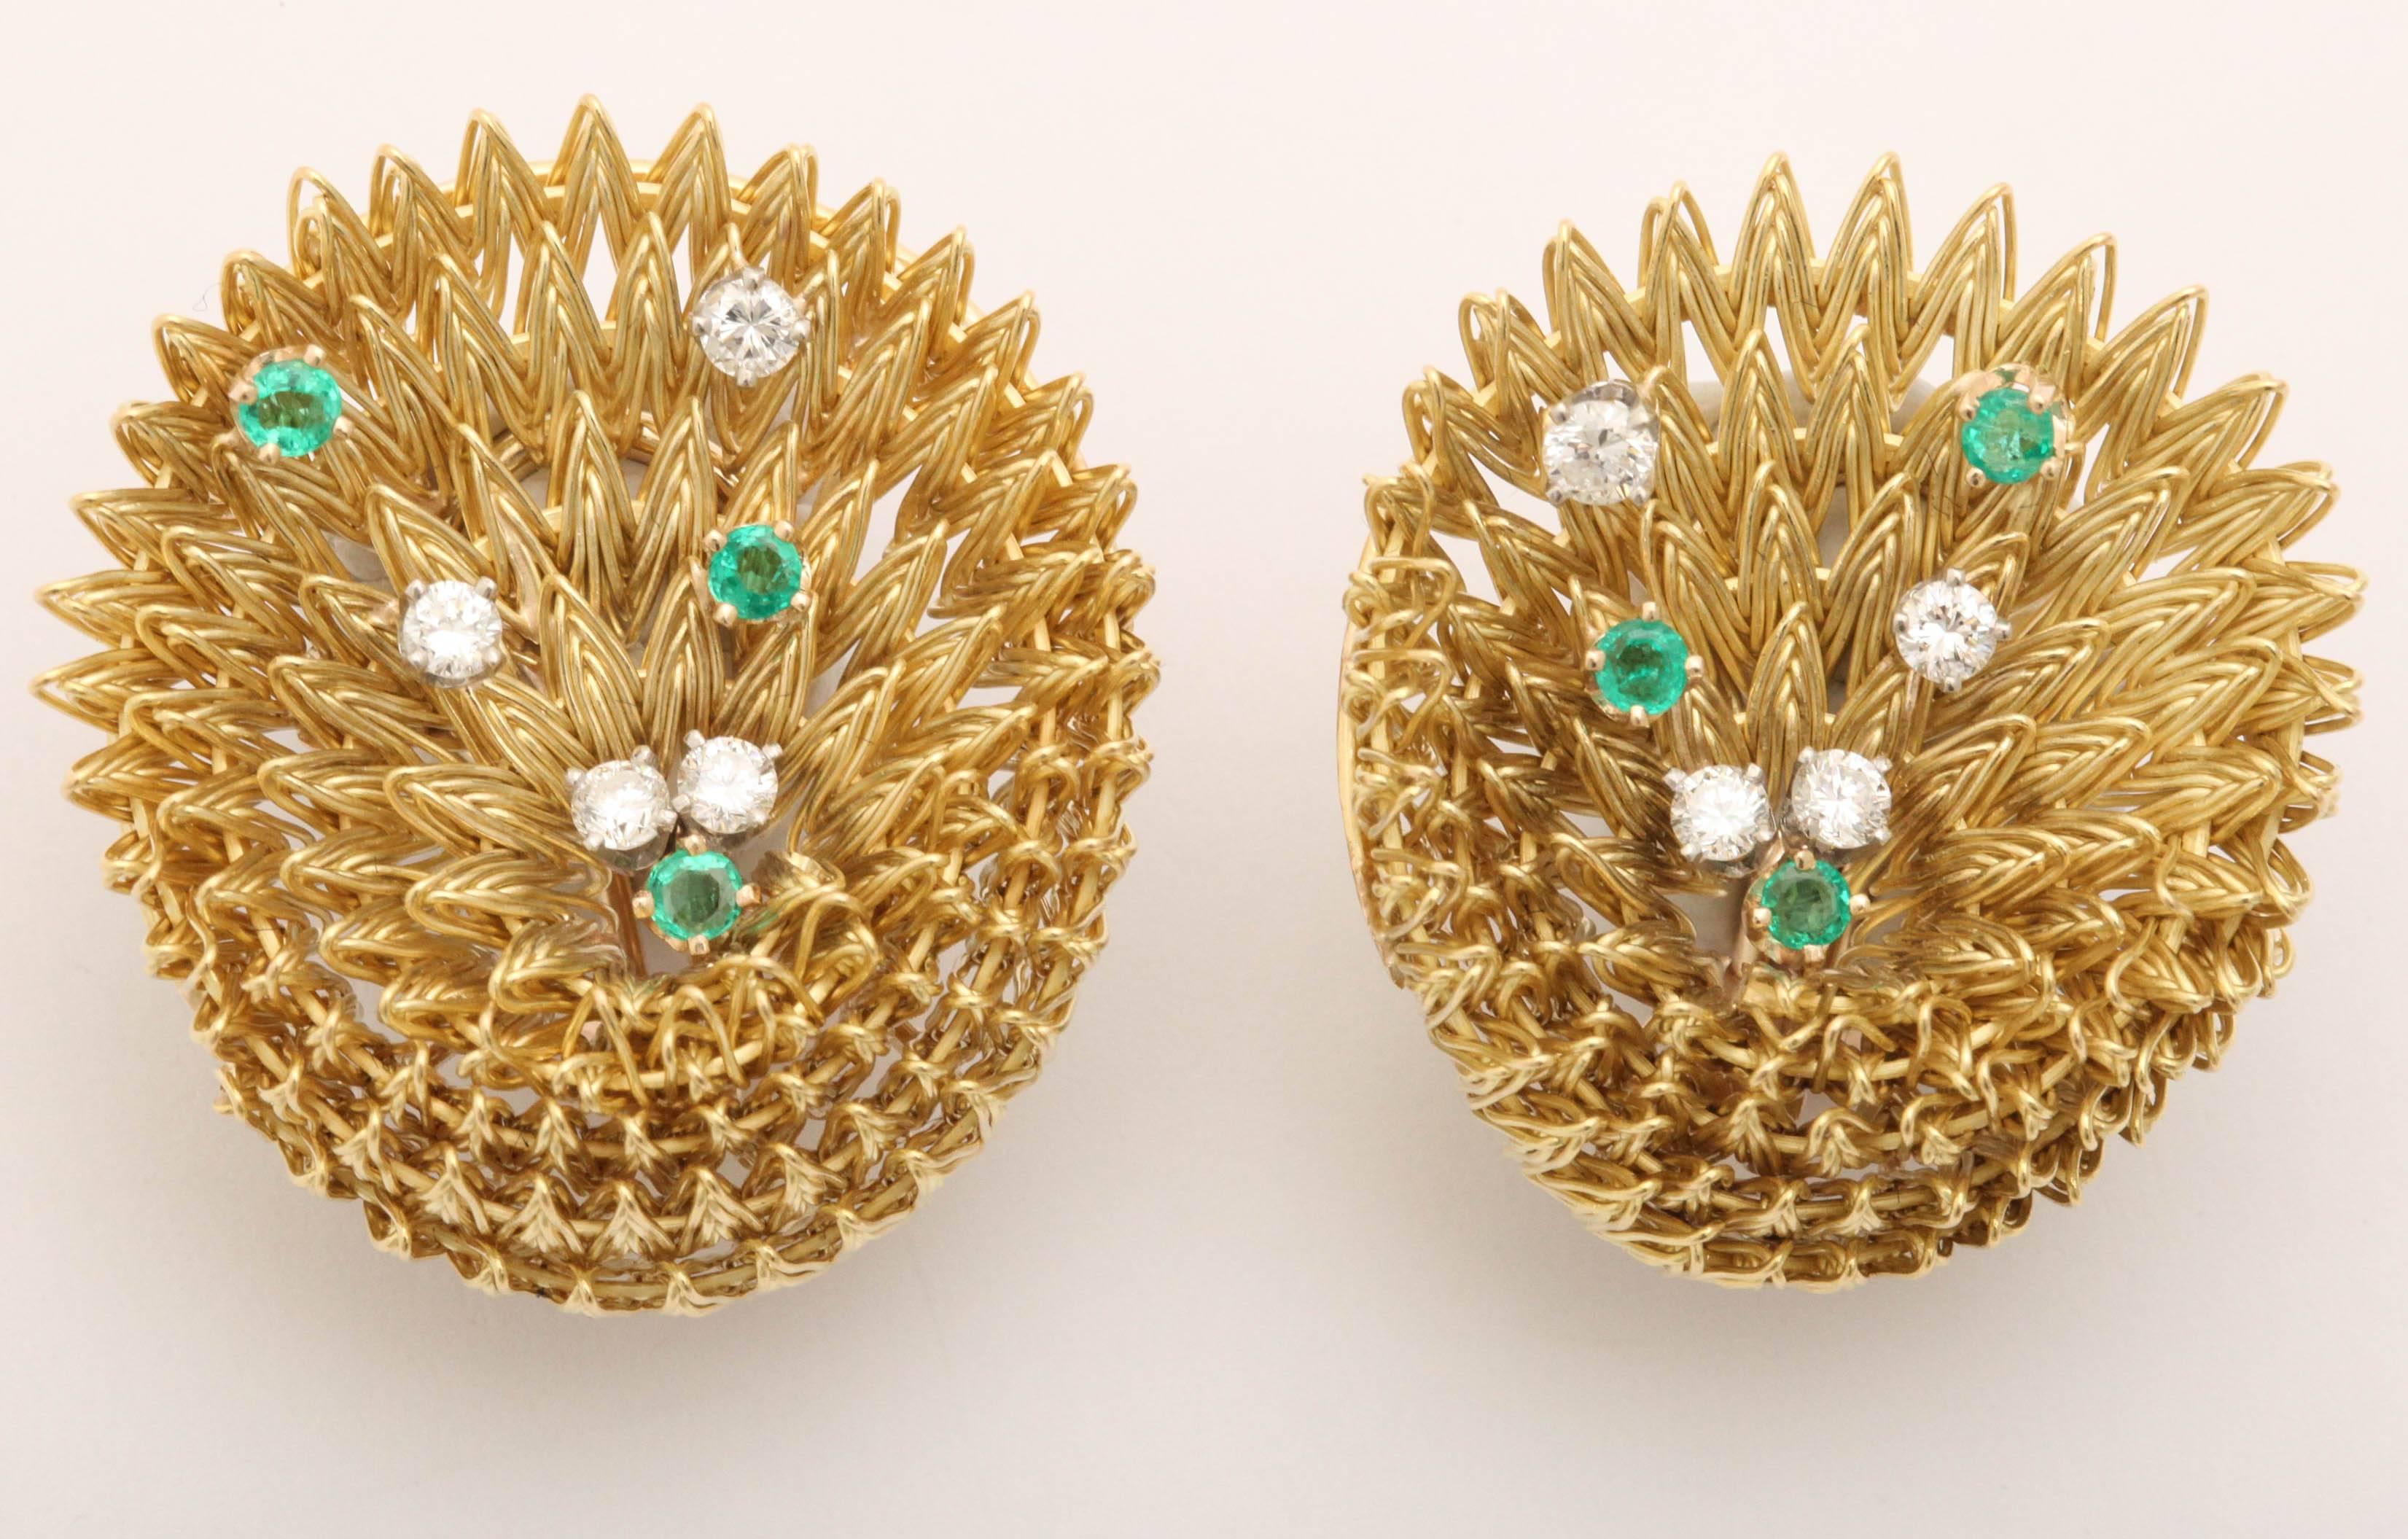 Pair  of 18kt Yellow Gold woven and intertwined Earring Set - with Omega Backs - complemented by matching Pin. Signed L in a Triangle  but unknown maker.
Sprinkled with asymmetric f Prong set Emeralds and Diamonds. 